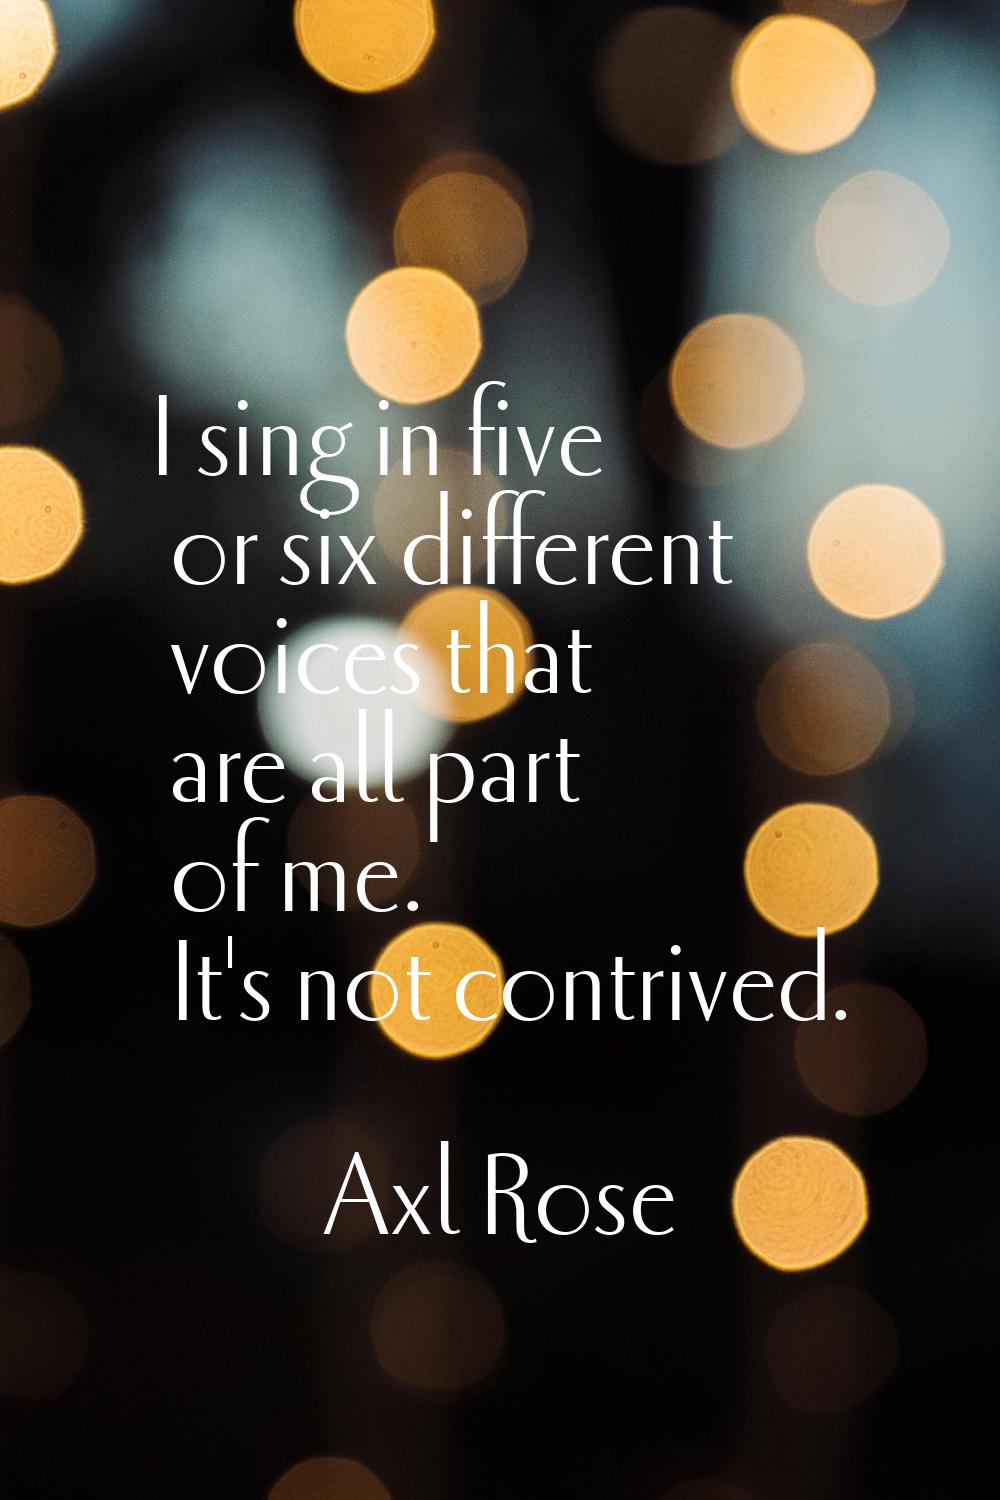 I sing in five or six different voices that are all part of me. It's not contrived.